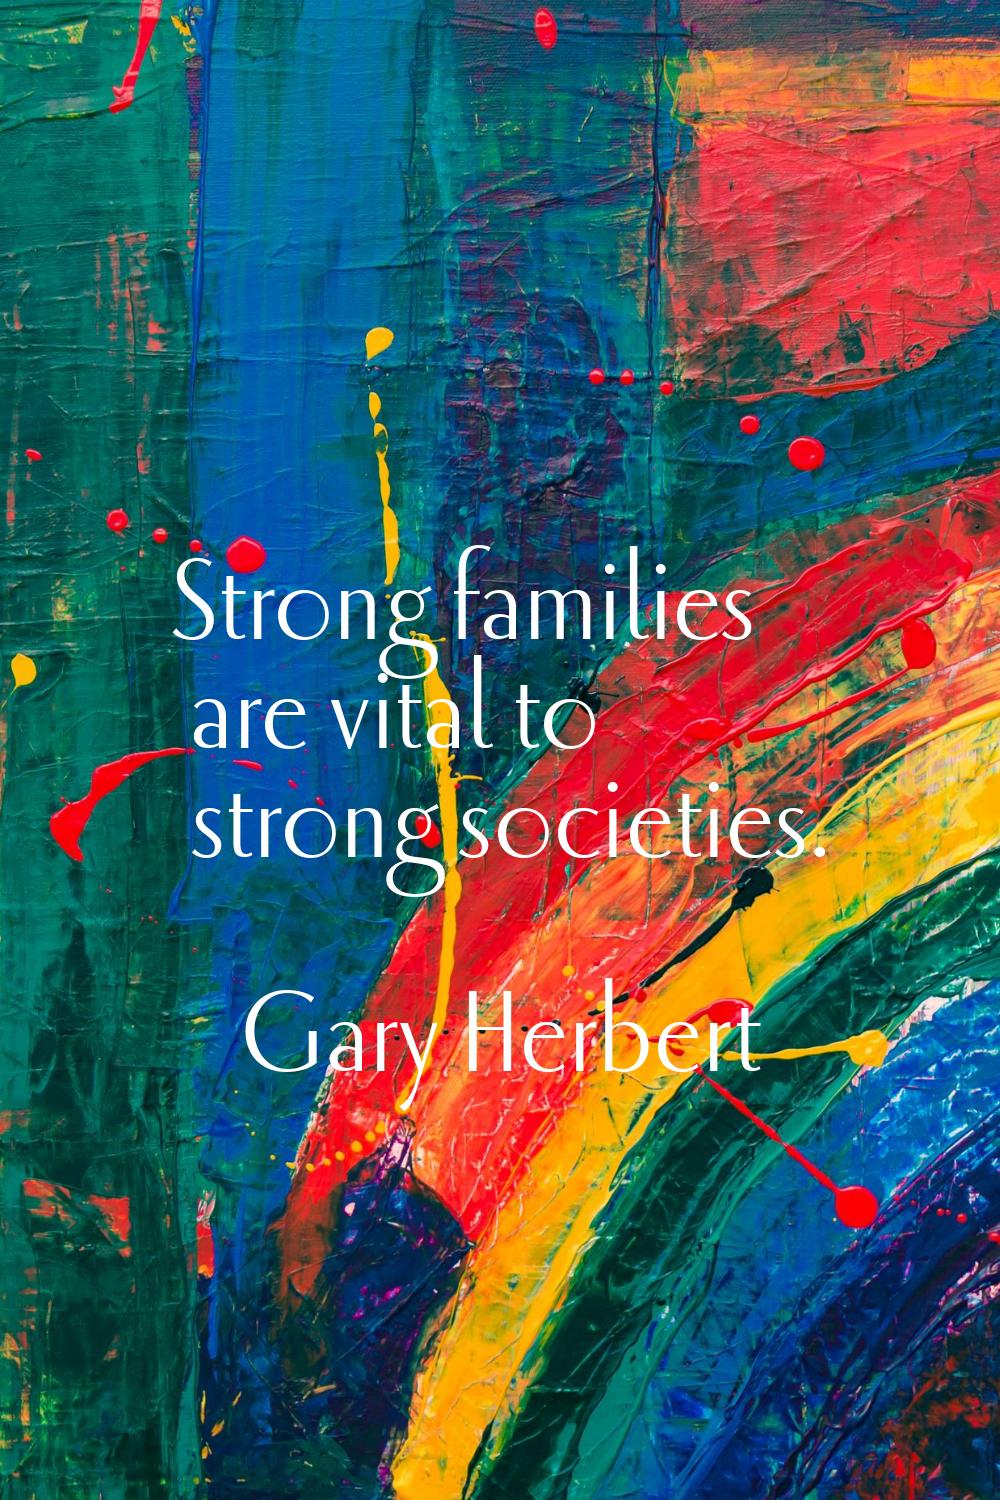 Strong families are vital to strong societies.